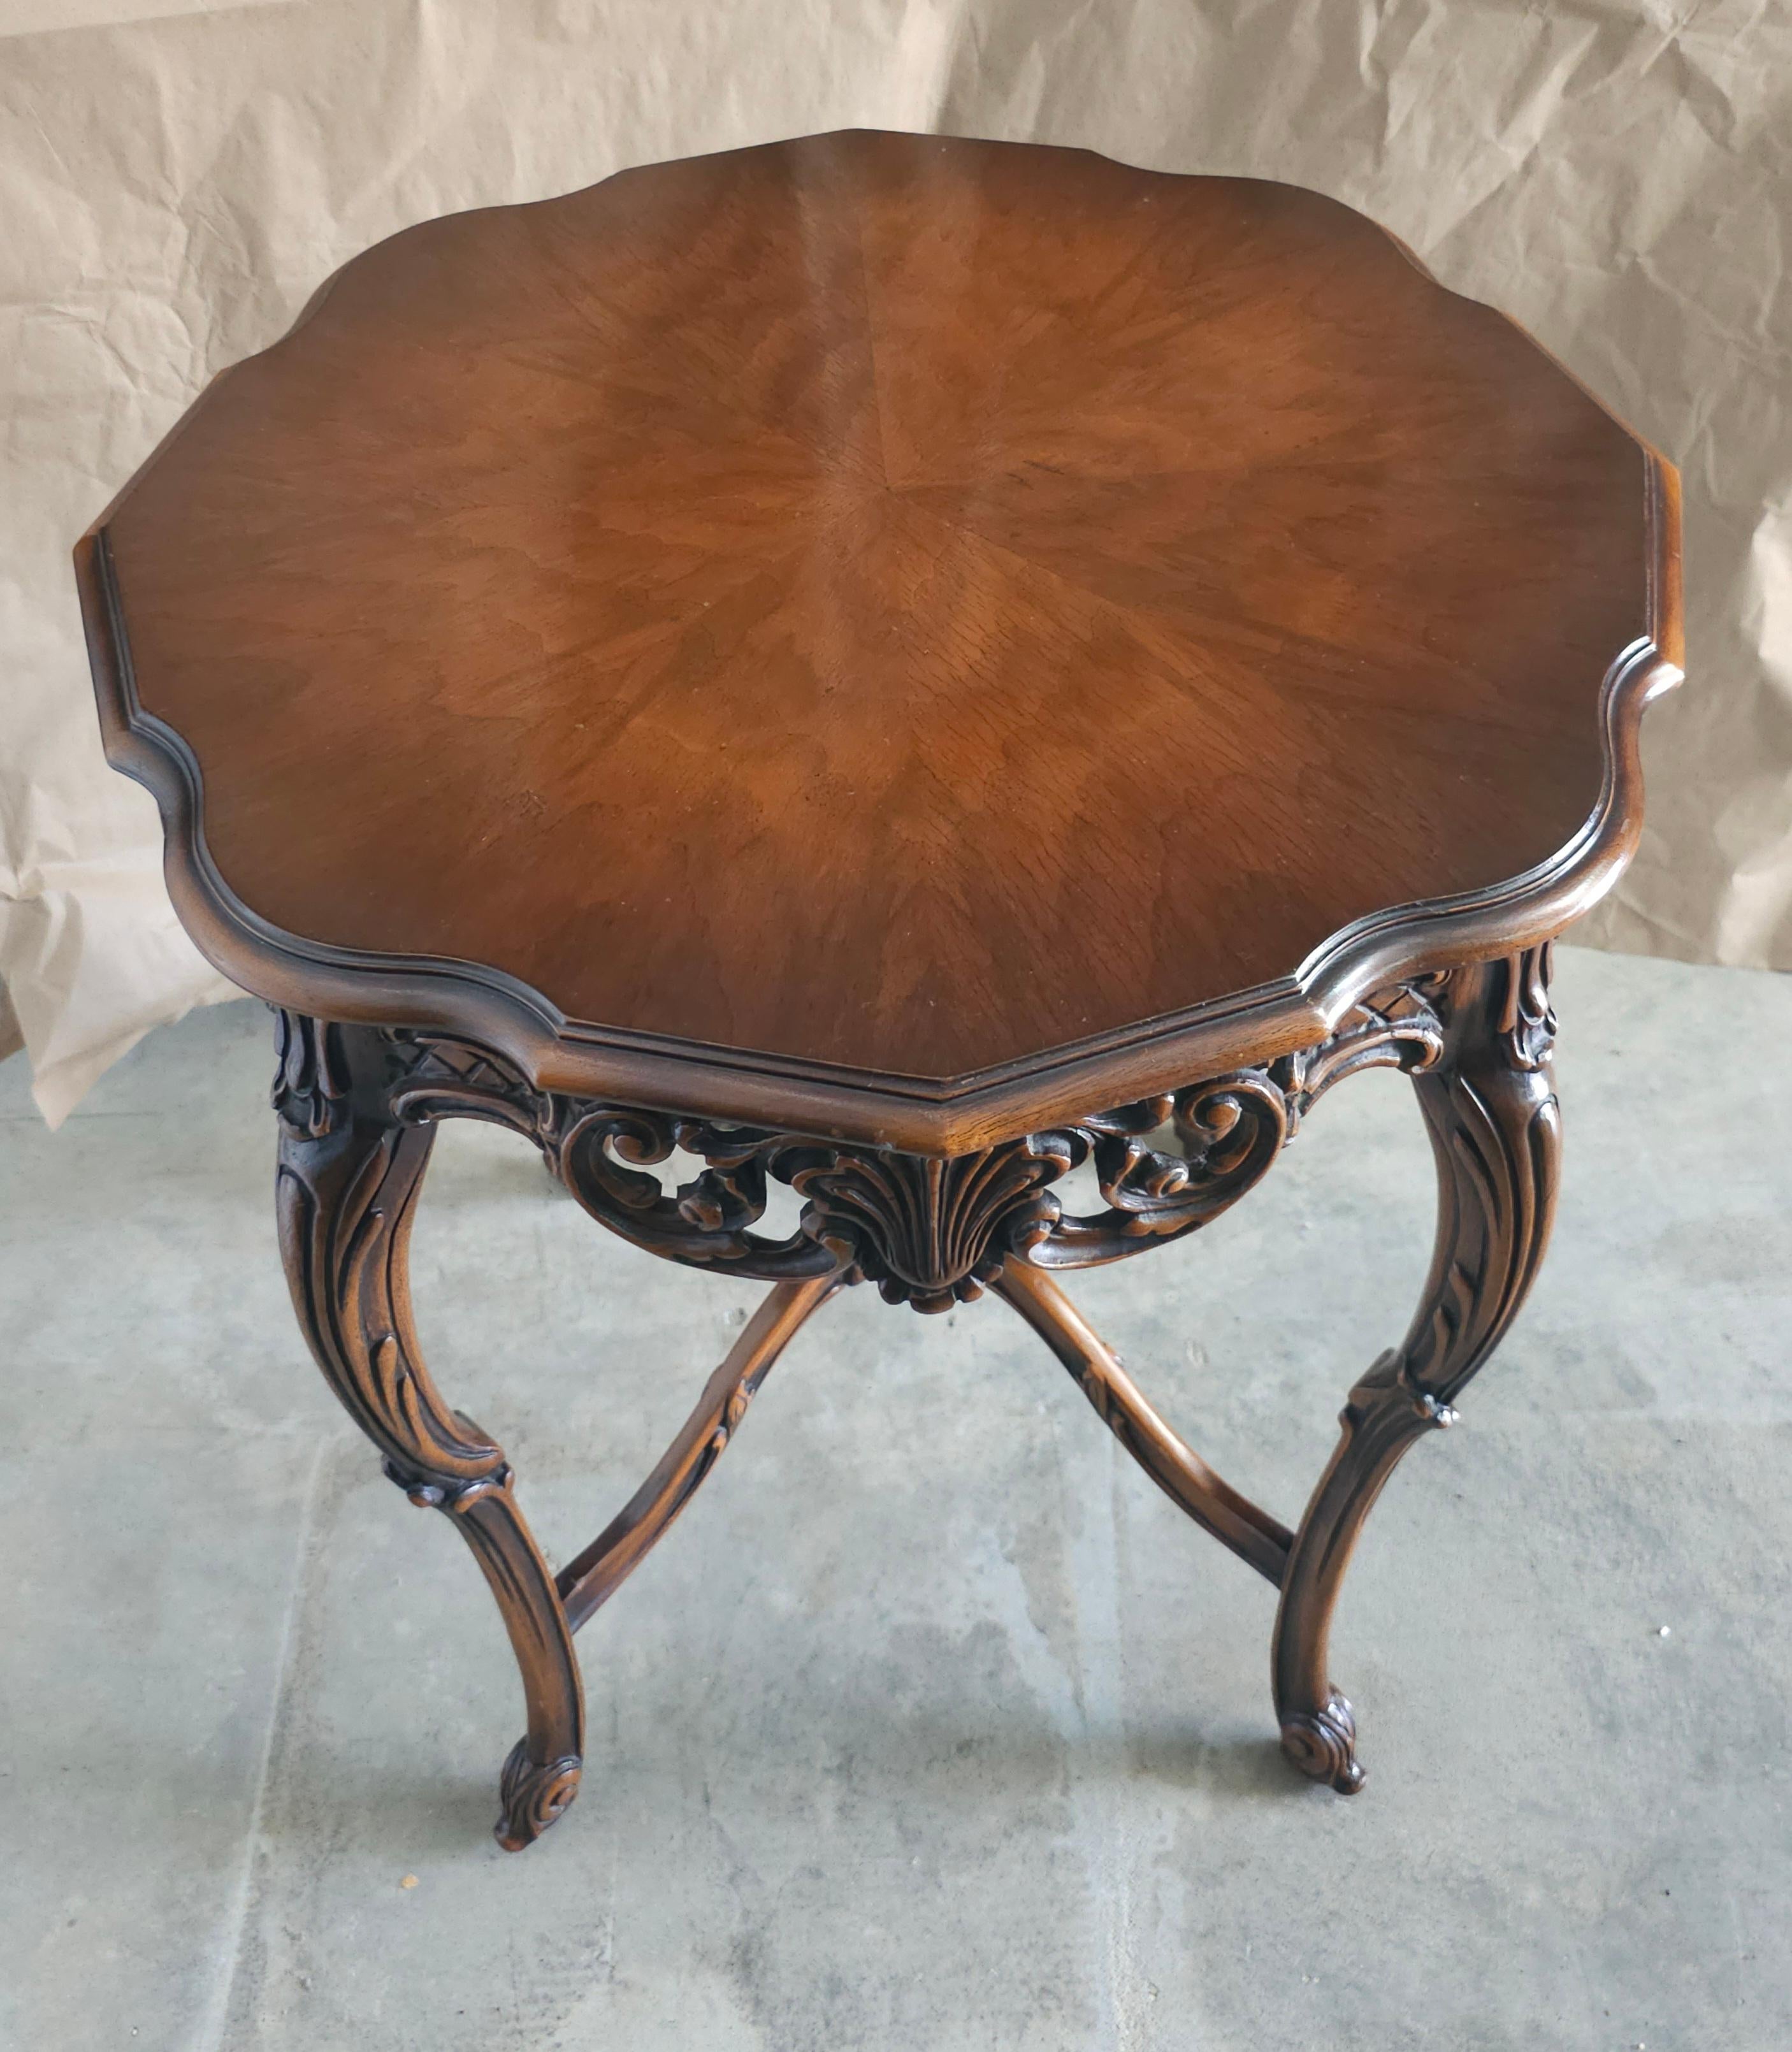 20th Century Louis XV Provincial Style Carved Walnut Gueridon Table In Good Condition For Sale In Germantown, MD